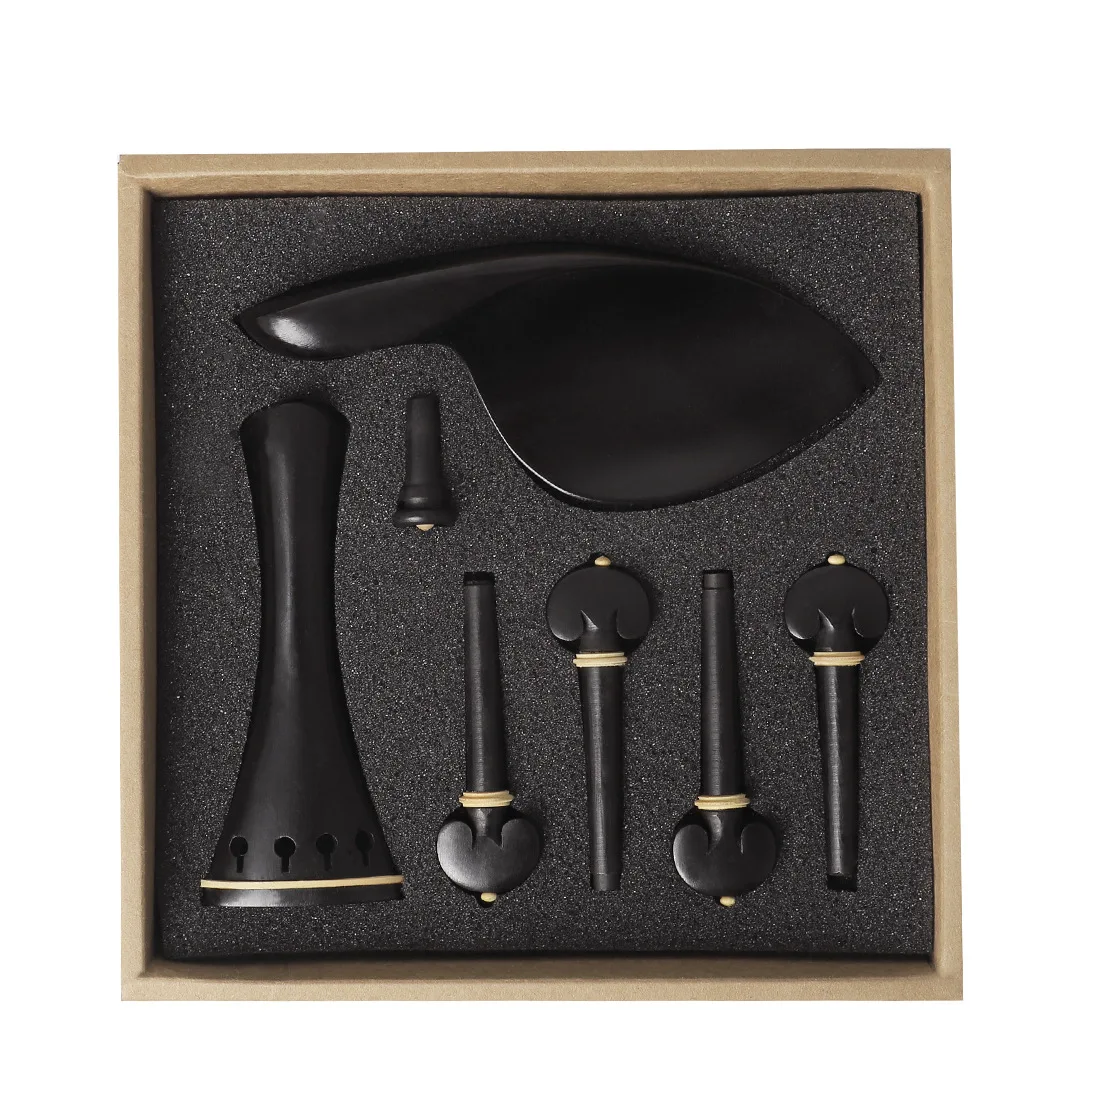 

High Quality One set of high-end violin 4/4 ebony material accessories including Chin Rest Knob Tailpiece Pegs